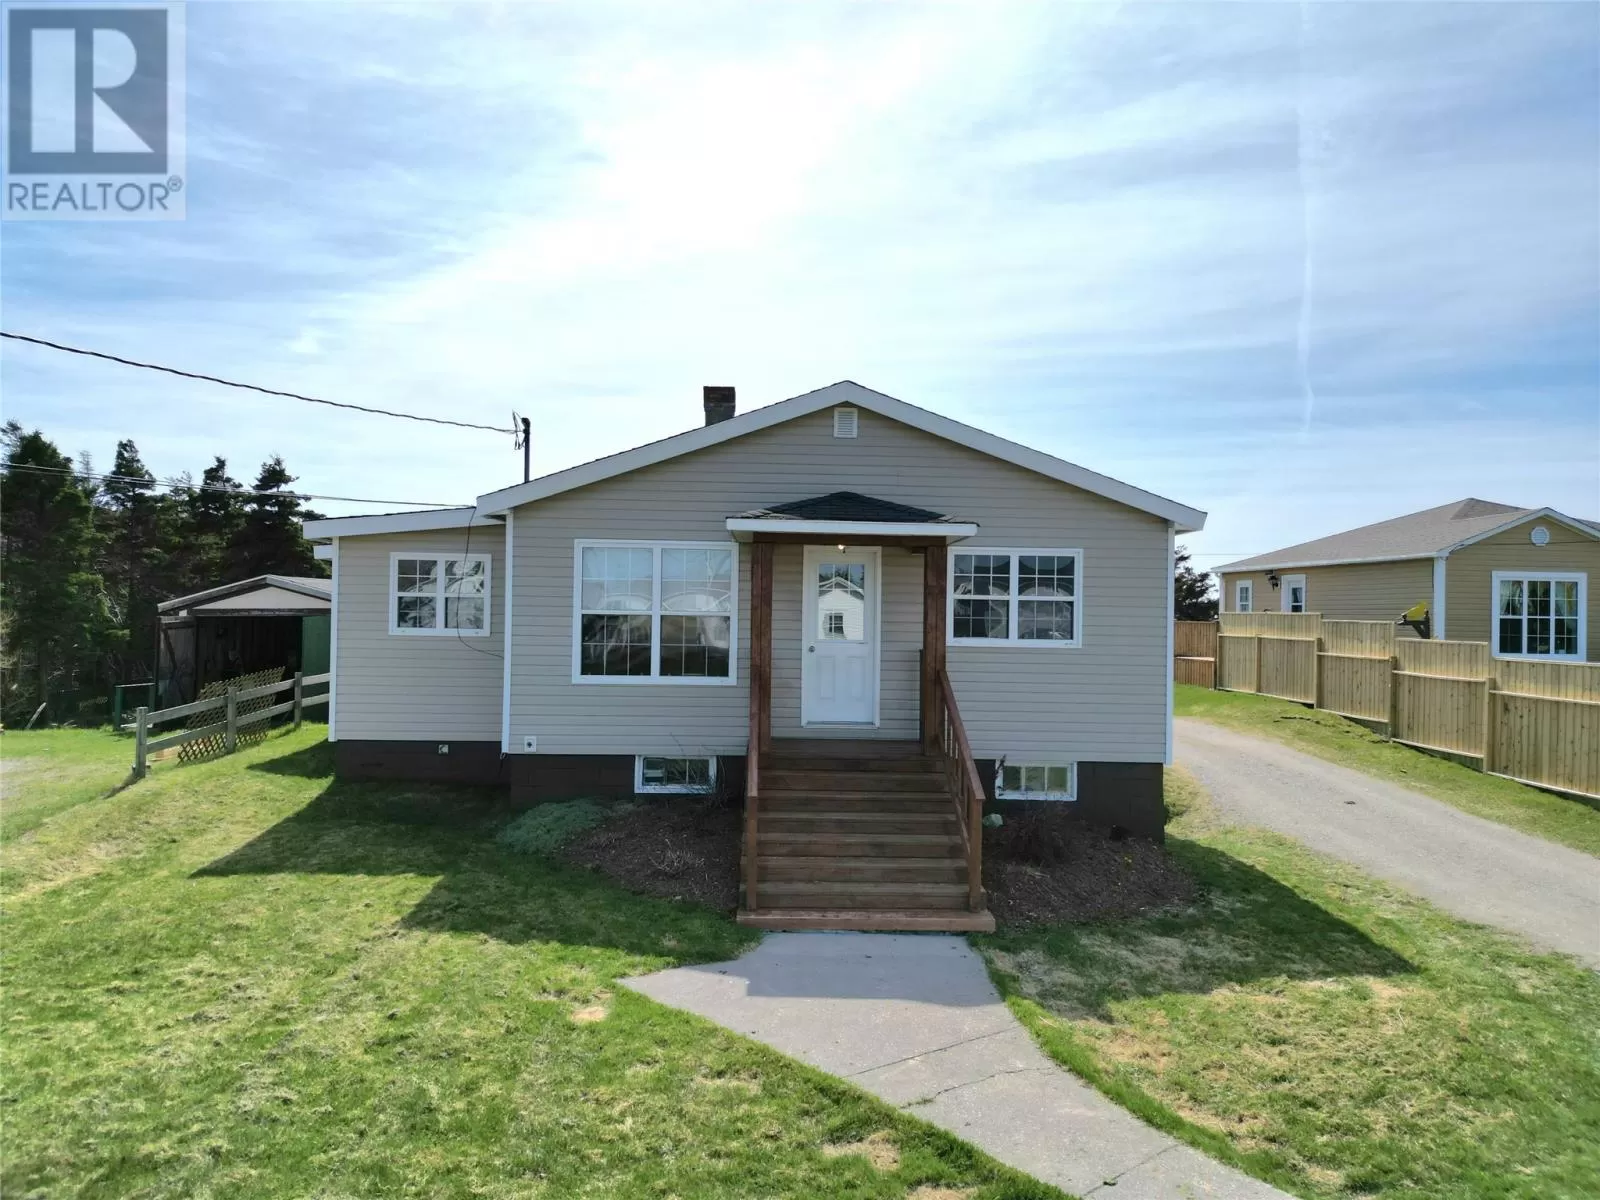 House for rent: 57a Main Street, Stephenville Crossing, Newfoundland & Labrador A0N 2C0